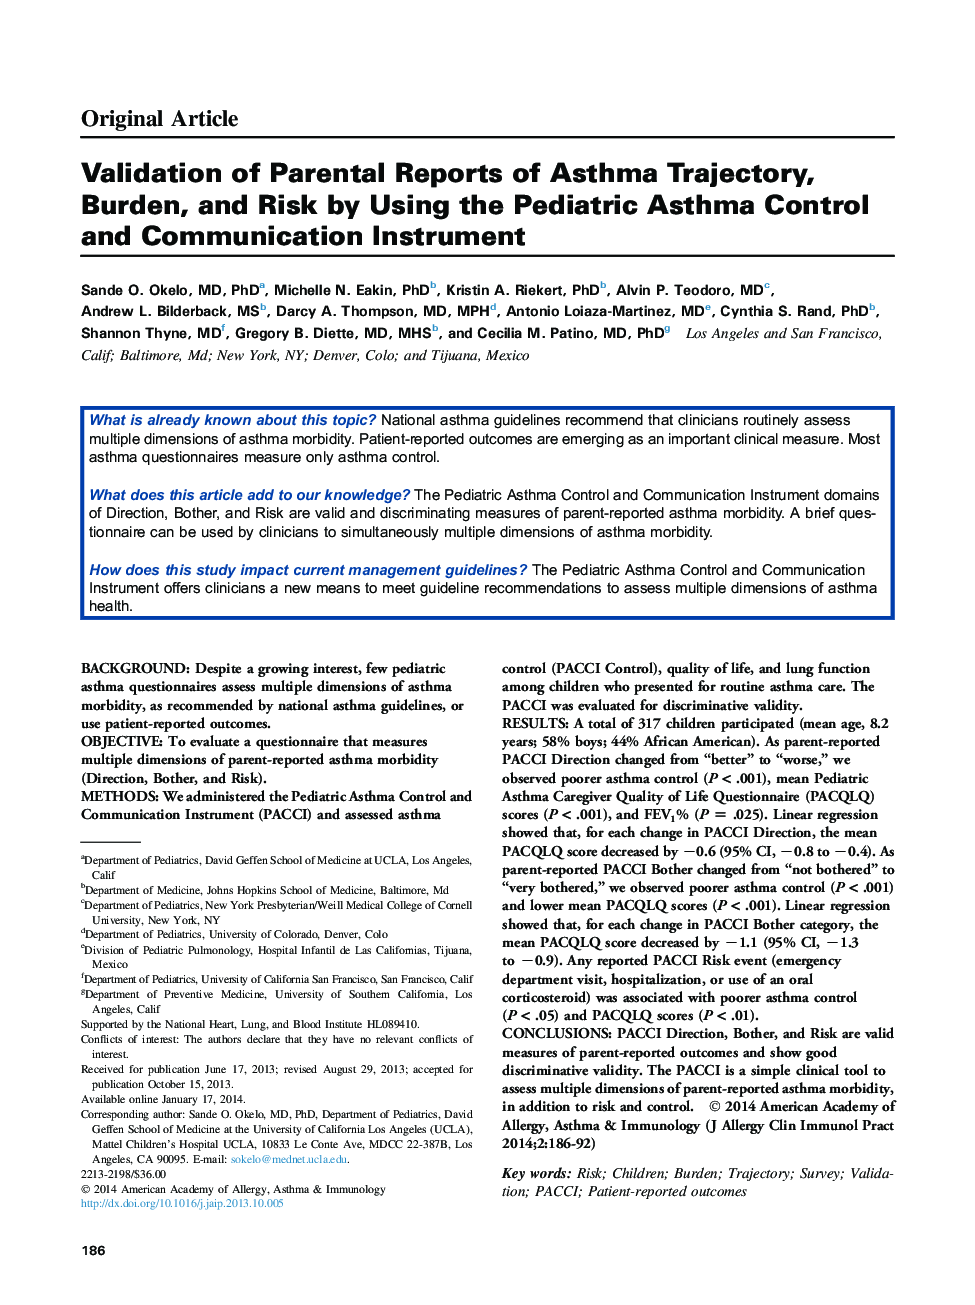 Validation of Parental Reports of Asthma Trajectory, Burden, and Risk by Using the Pediatric Asthma Control and Communication Instrument